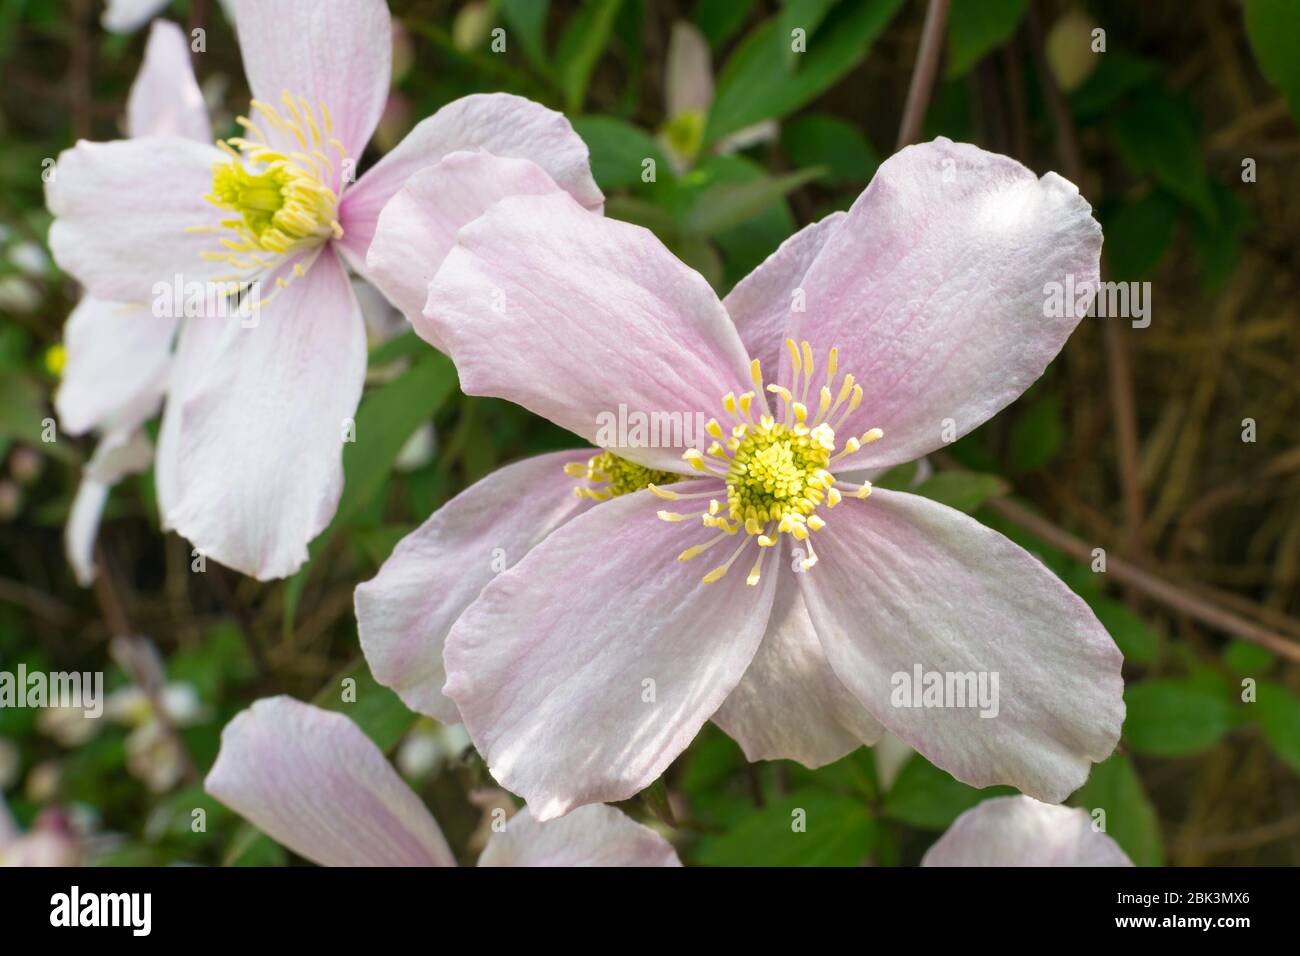 Soft pink colored Clematis flower. Clematis Montana, also known as mountain Clematis or Himalayan Clematis. Stock Photo